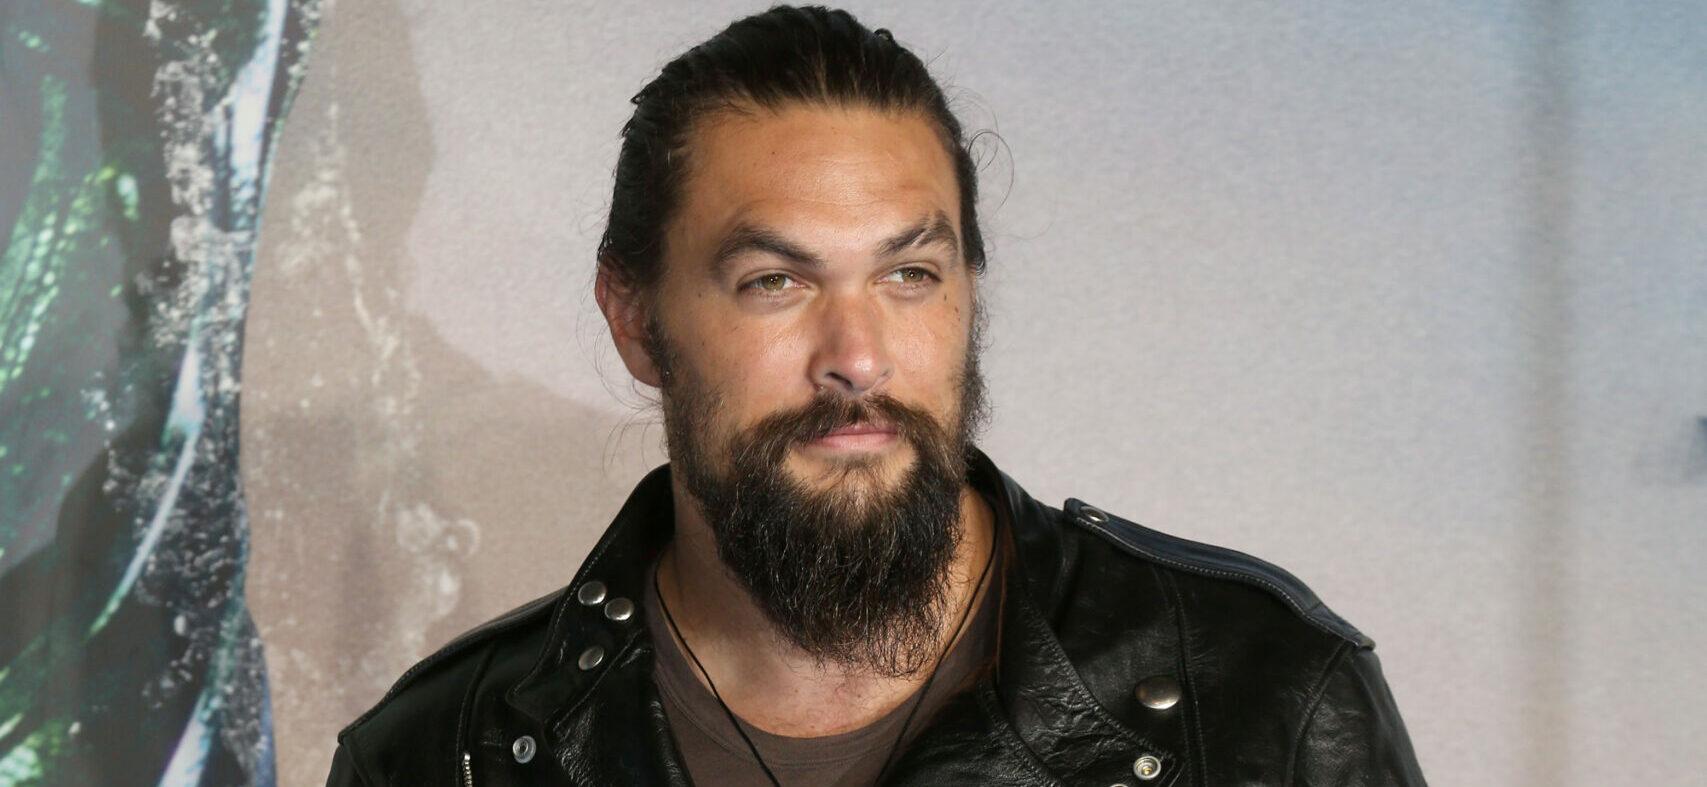 ‘Dune’ Star Jason Momoa Reveals He Lost His Nerves While Shooting The Movie